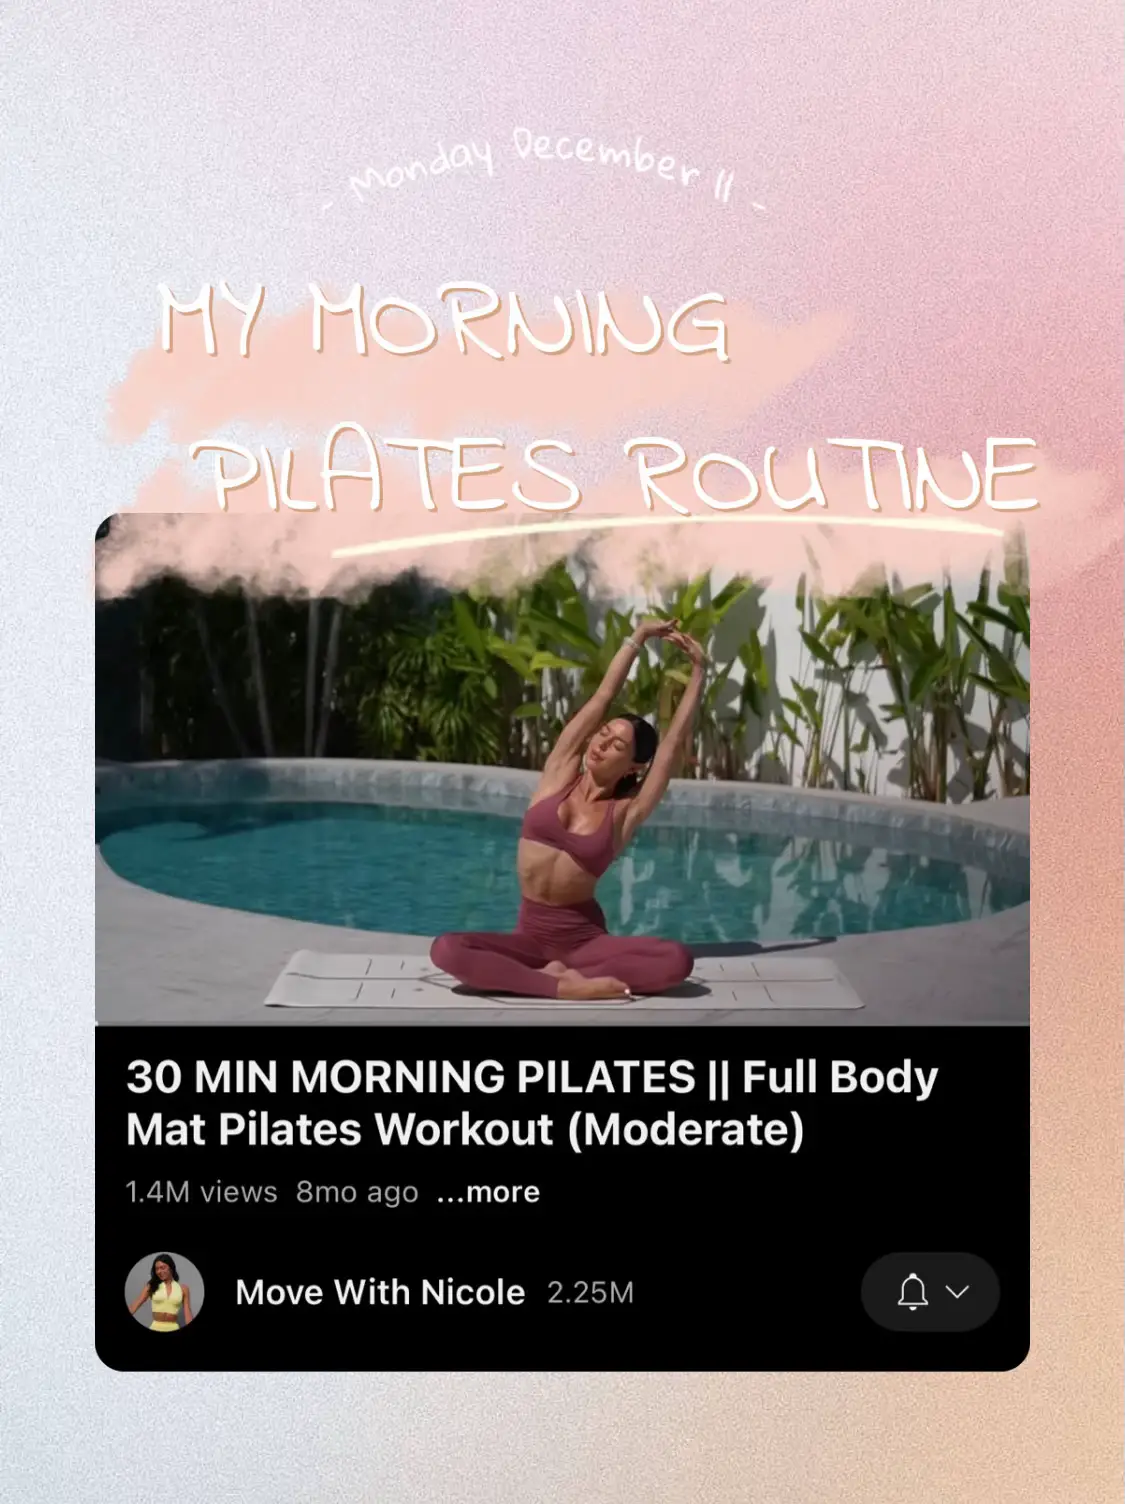 energizing full body Pilates workout for ya on this lovely  Saturday✨building strength in a gentle yet VERY effective way, enjoy🤍  wo